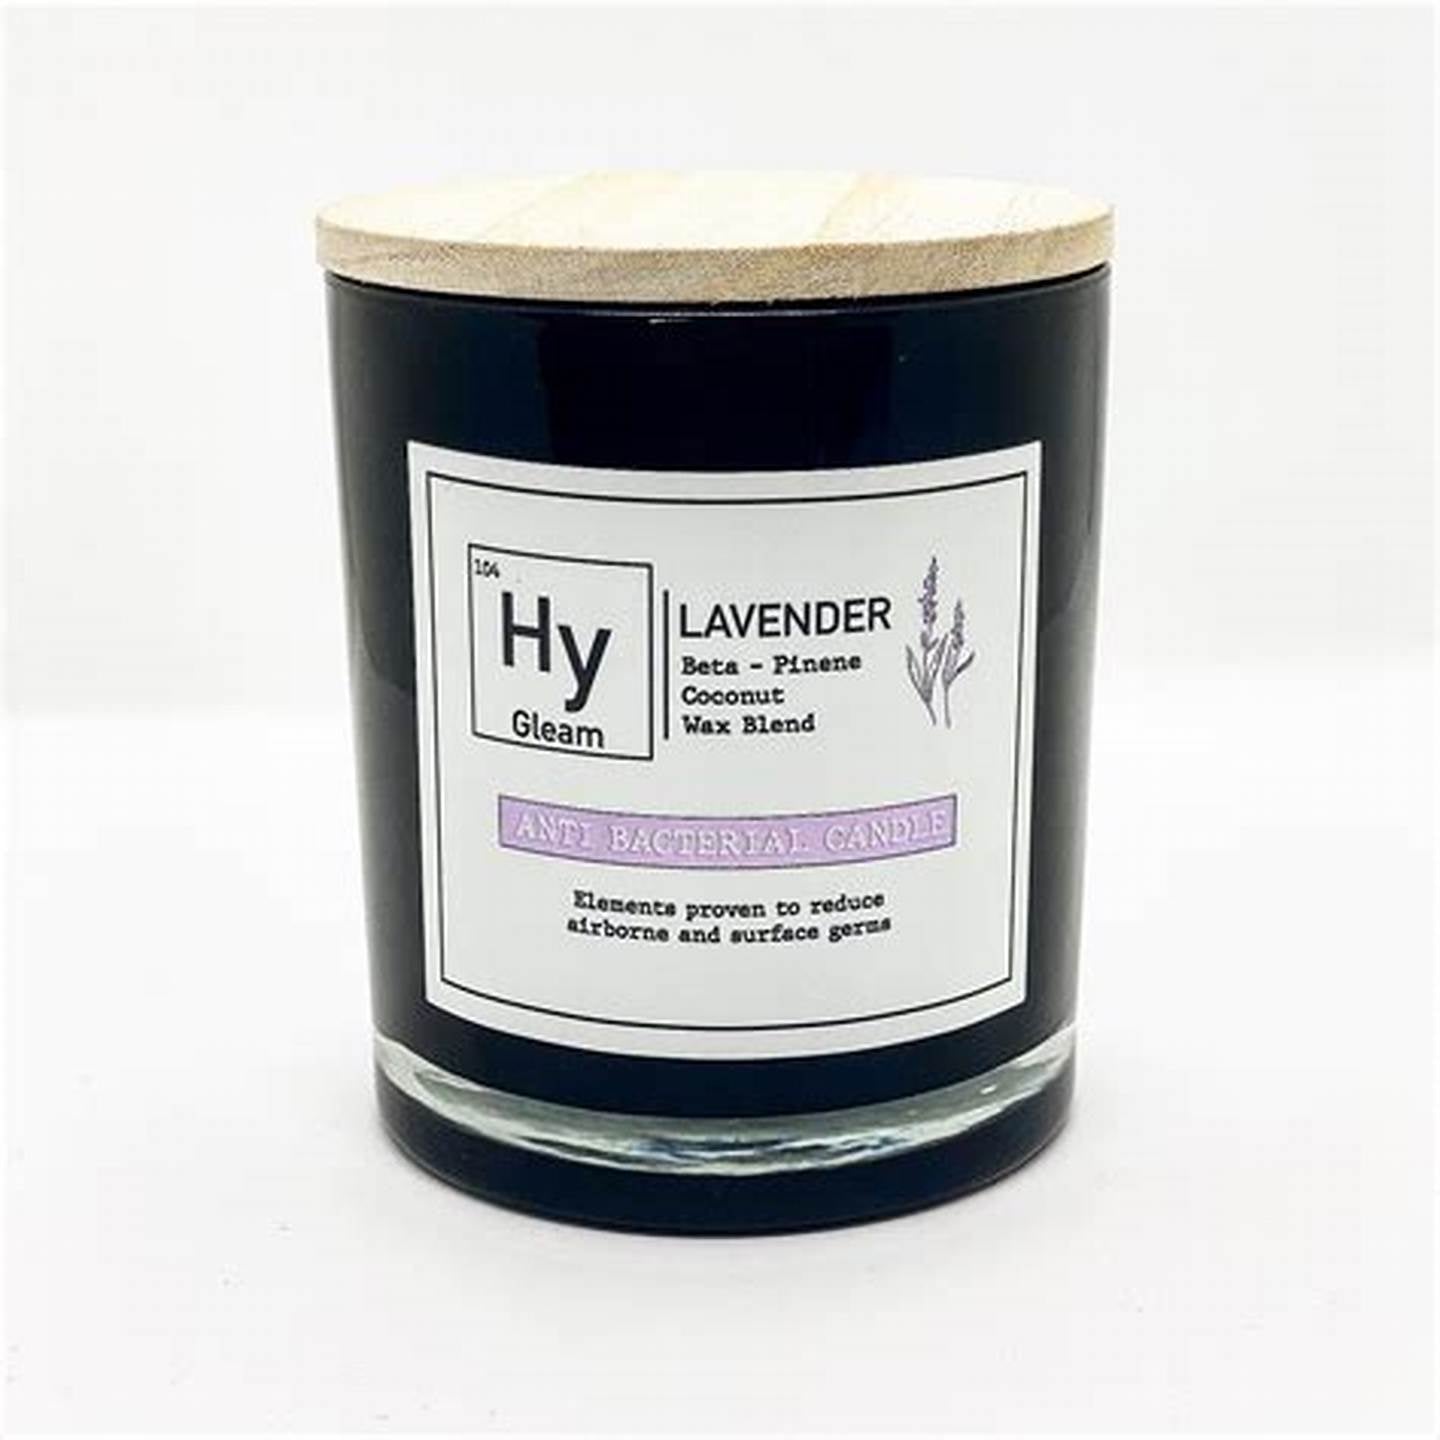 Our Nation's Creations HyGleam Lavender Candle Anti Bacterial Coconut Wax Blend Beta-Pinena